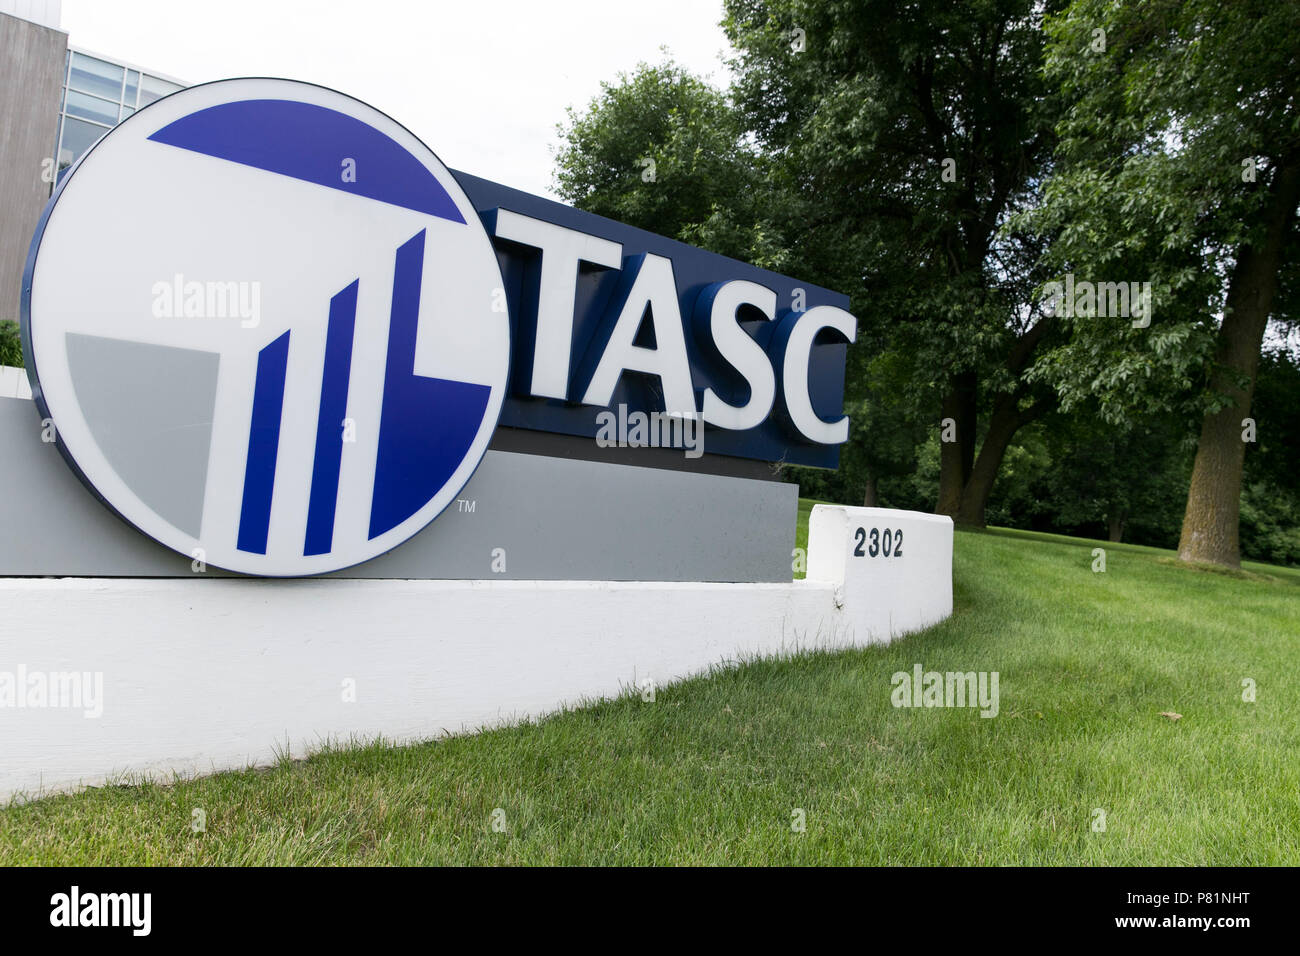 A logo sign outside of facility occupied by TASC (Total Administrative Services Corporation) in Madison, Wisconsin, on June 23, 2018. Stock Photo